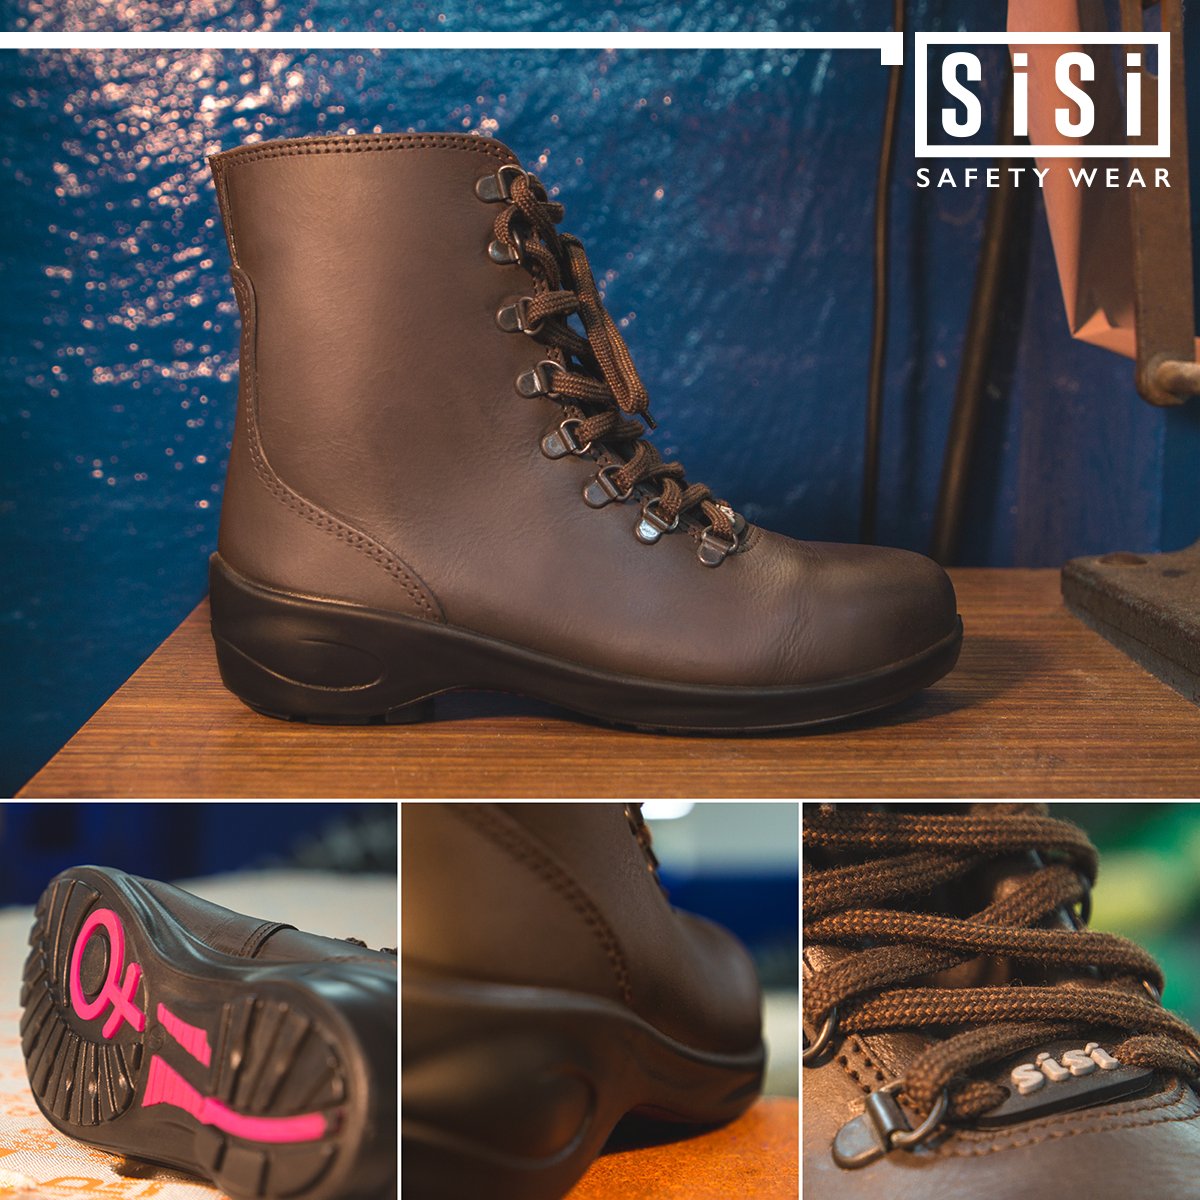 sisi safety boots